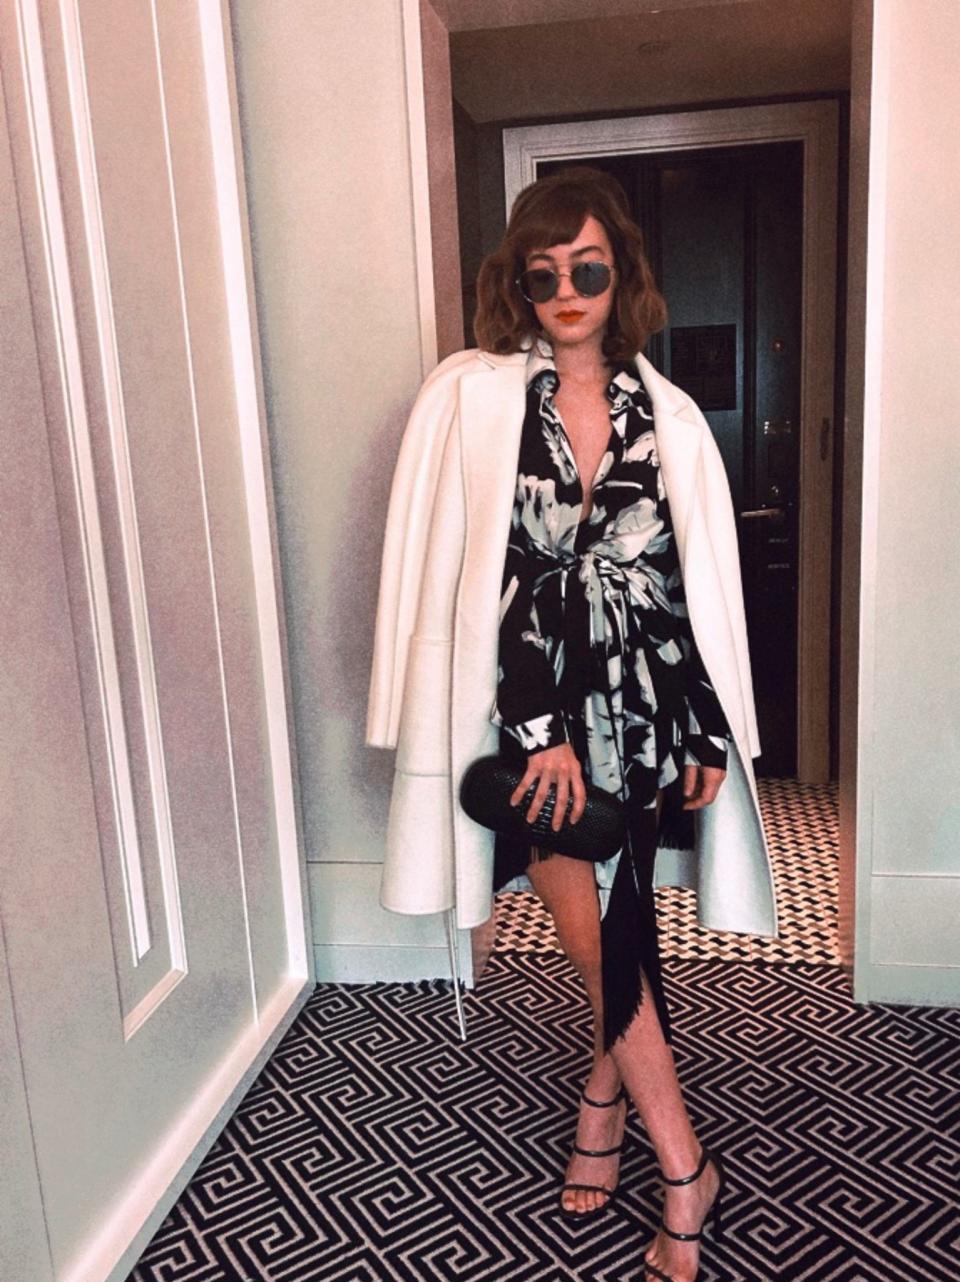 “The black-and-white pattern on this dress with the fringe immediately sparked my interest when I saw it. And because New York weather is so unpredictable, I added the white coat as another fun layer. The sunglasses were the final touch.”